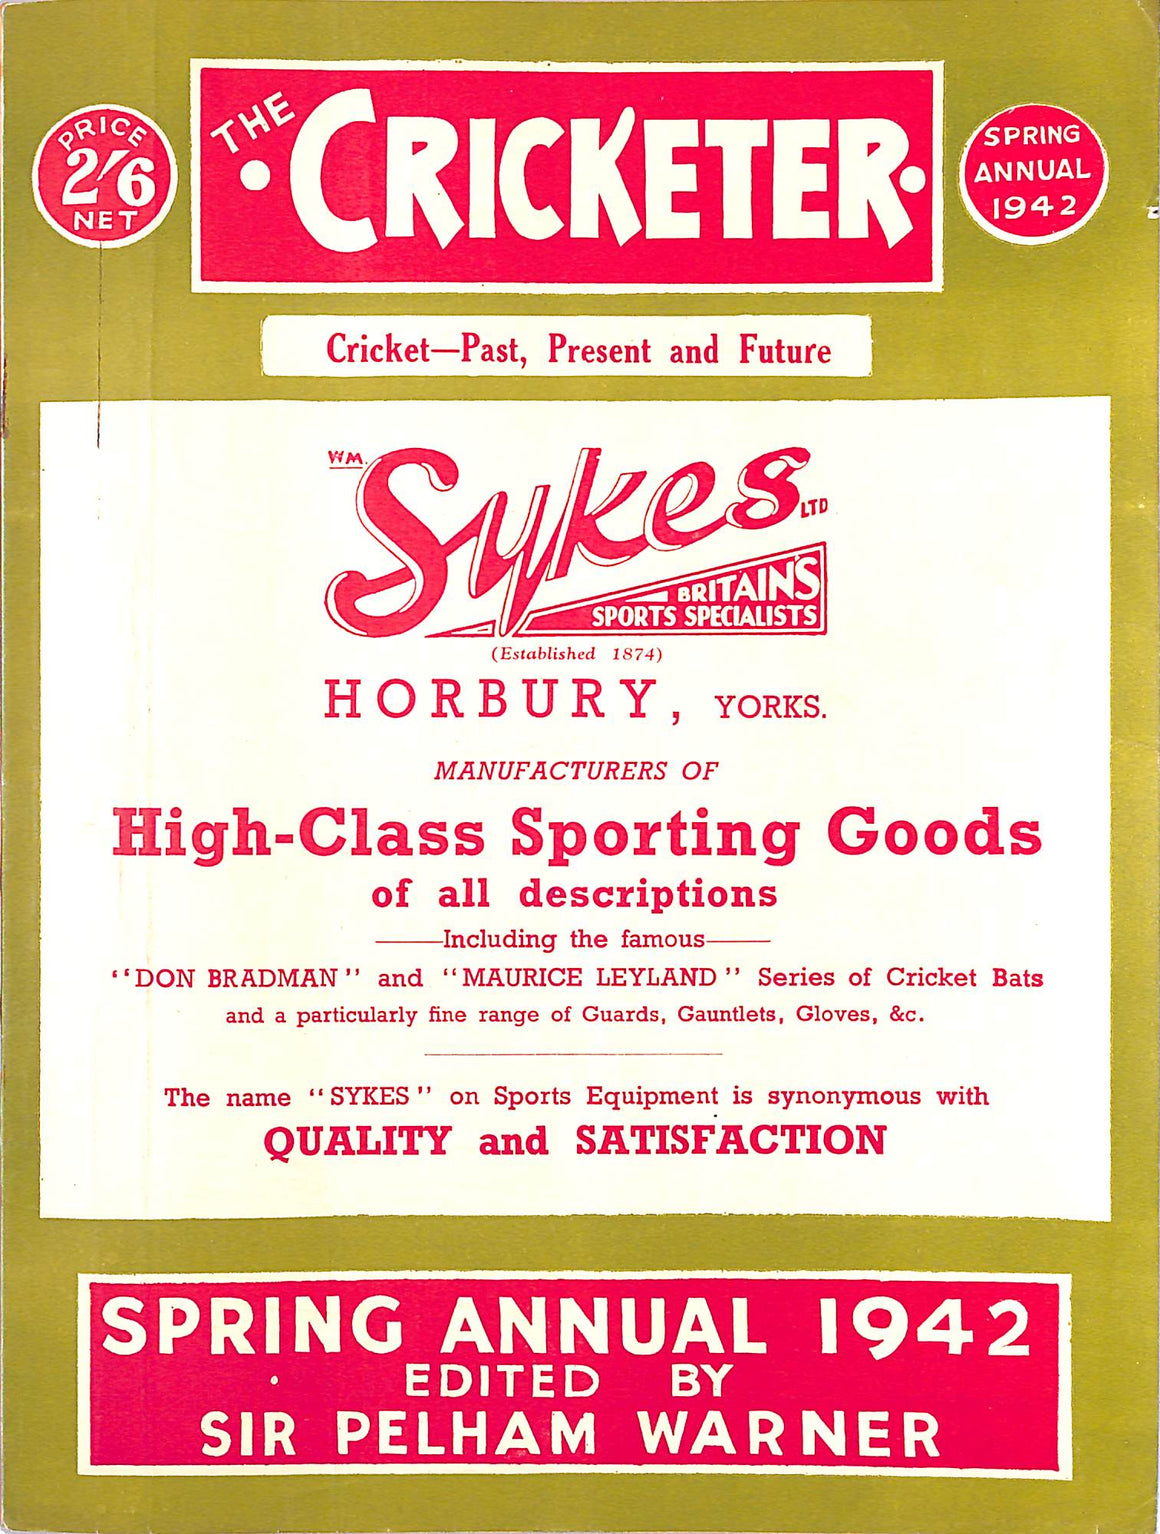 The Cricketer Spring Annual 1942